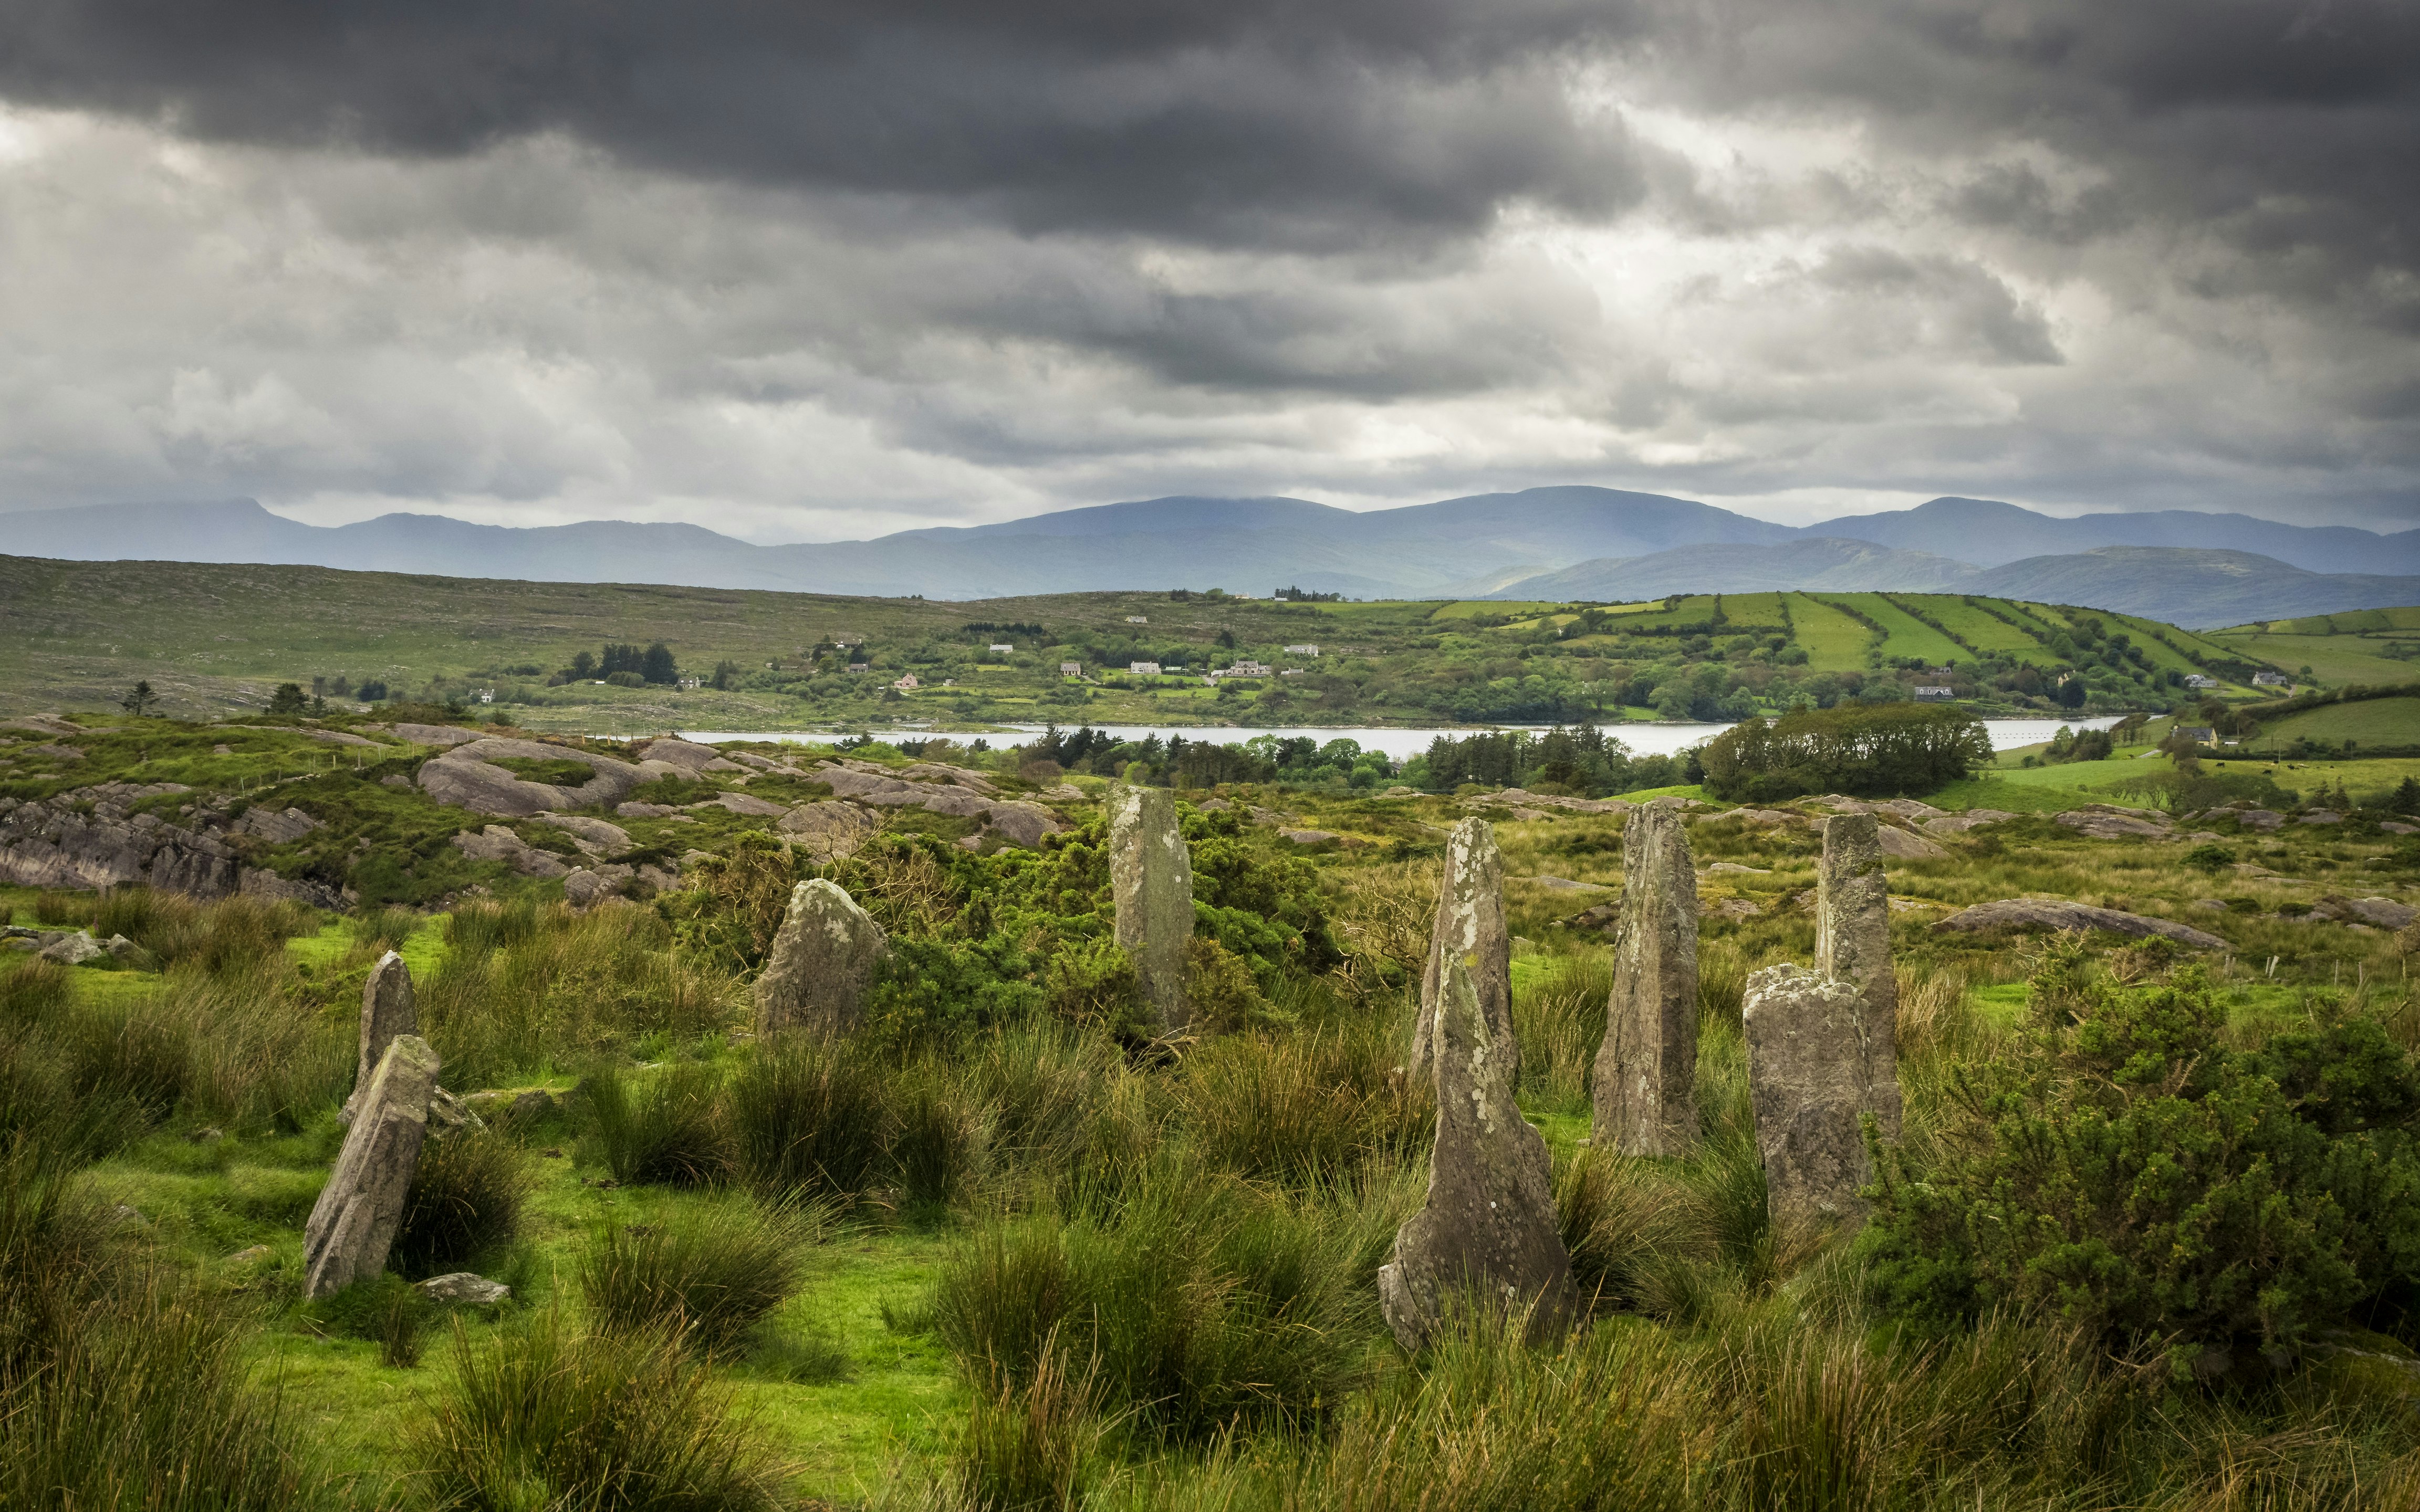 Stone circle in the middle of a wild, green landscape